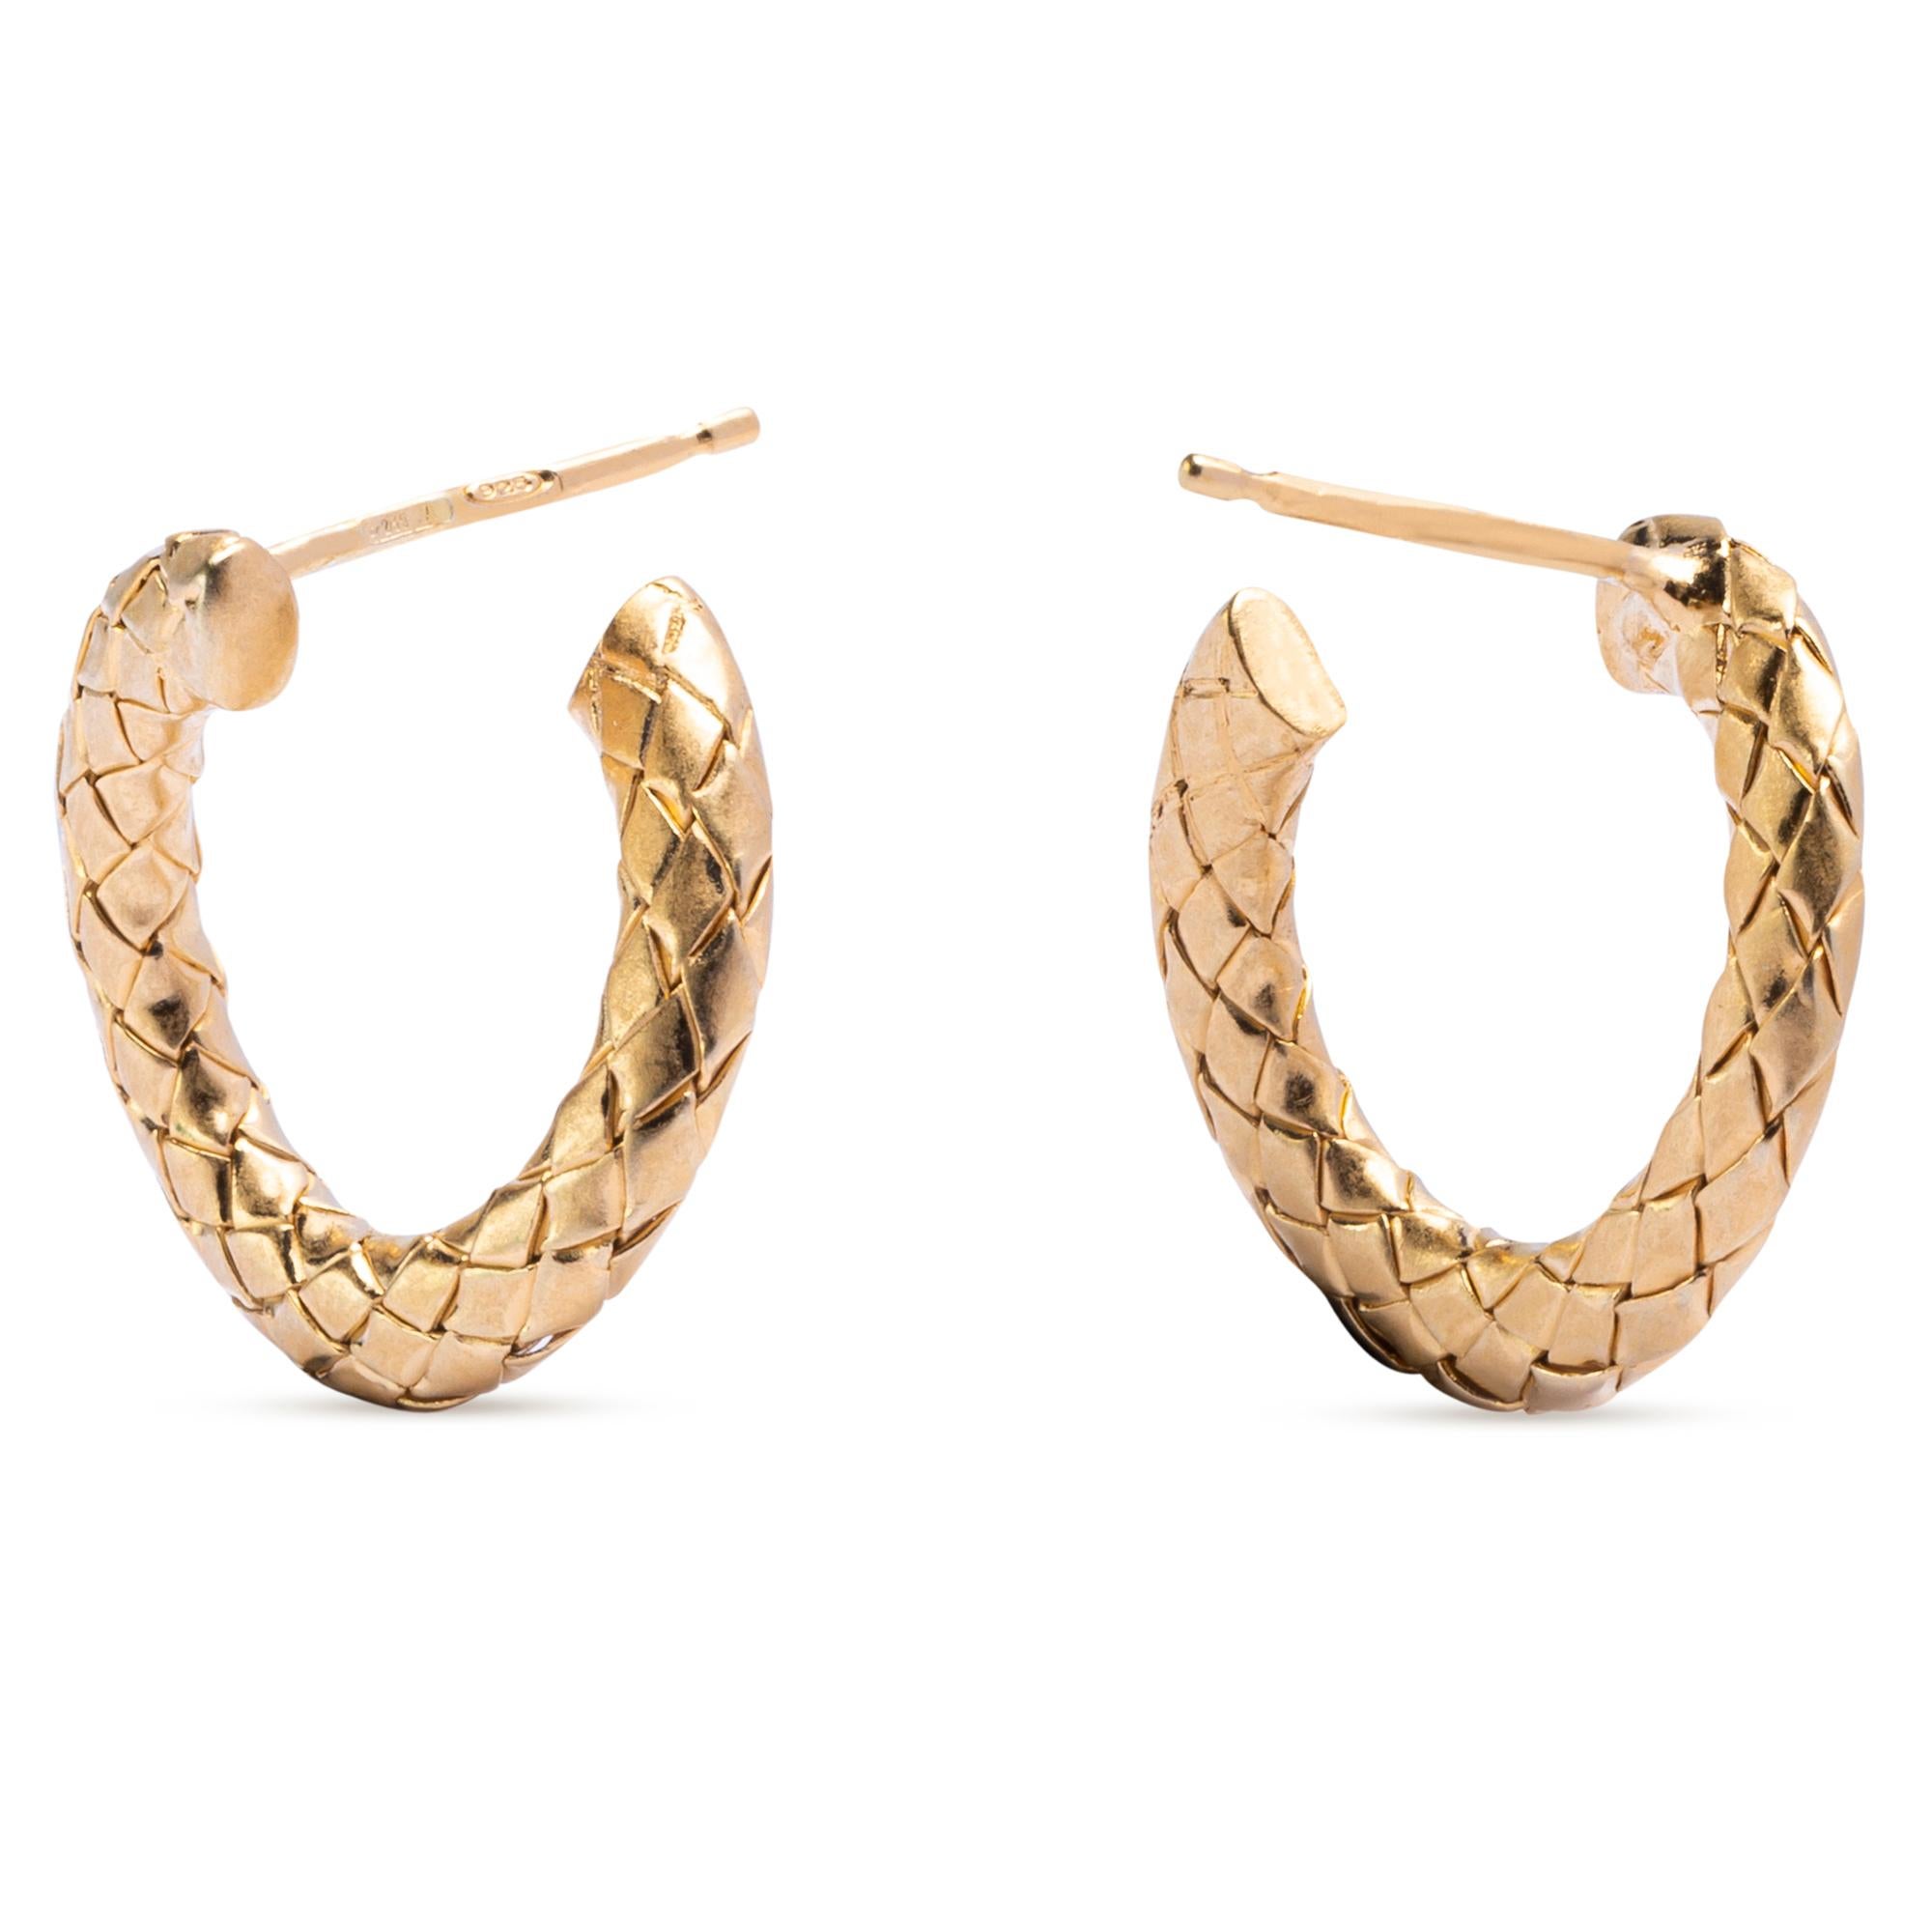 Alex Jona Satin Gold-Plated Sterling Silver Wooven Curb Hoop Earrings 1